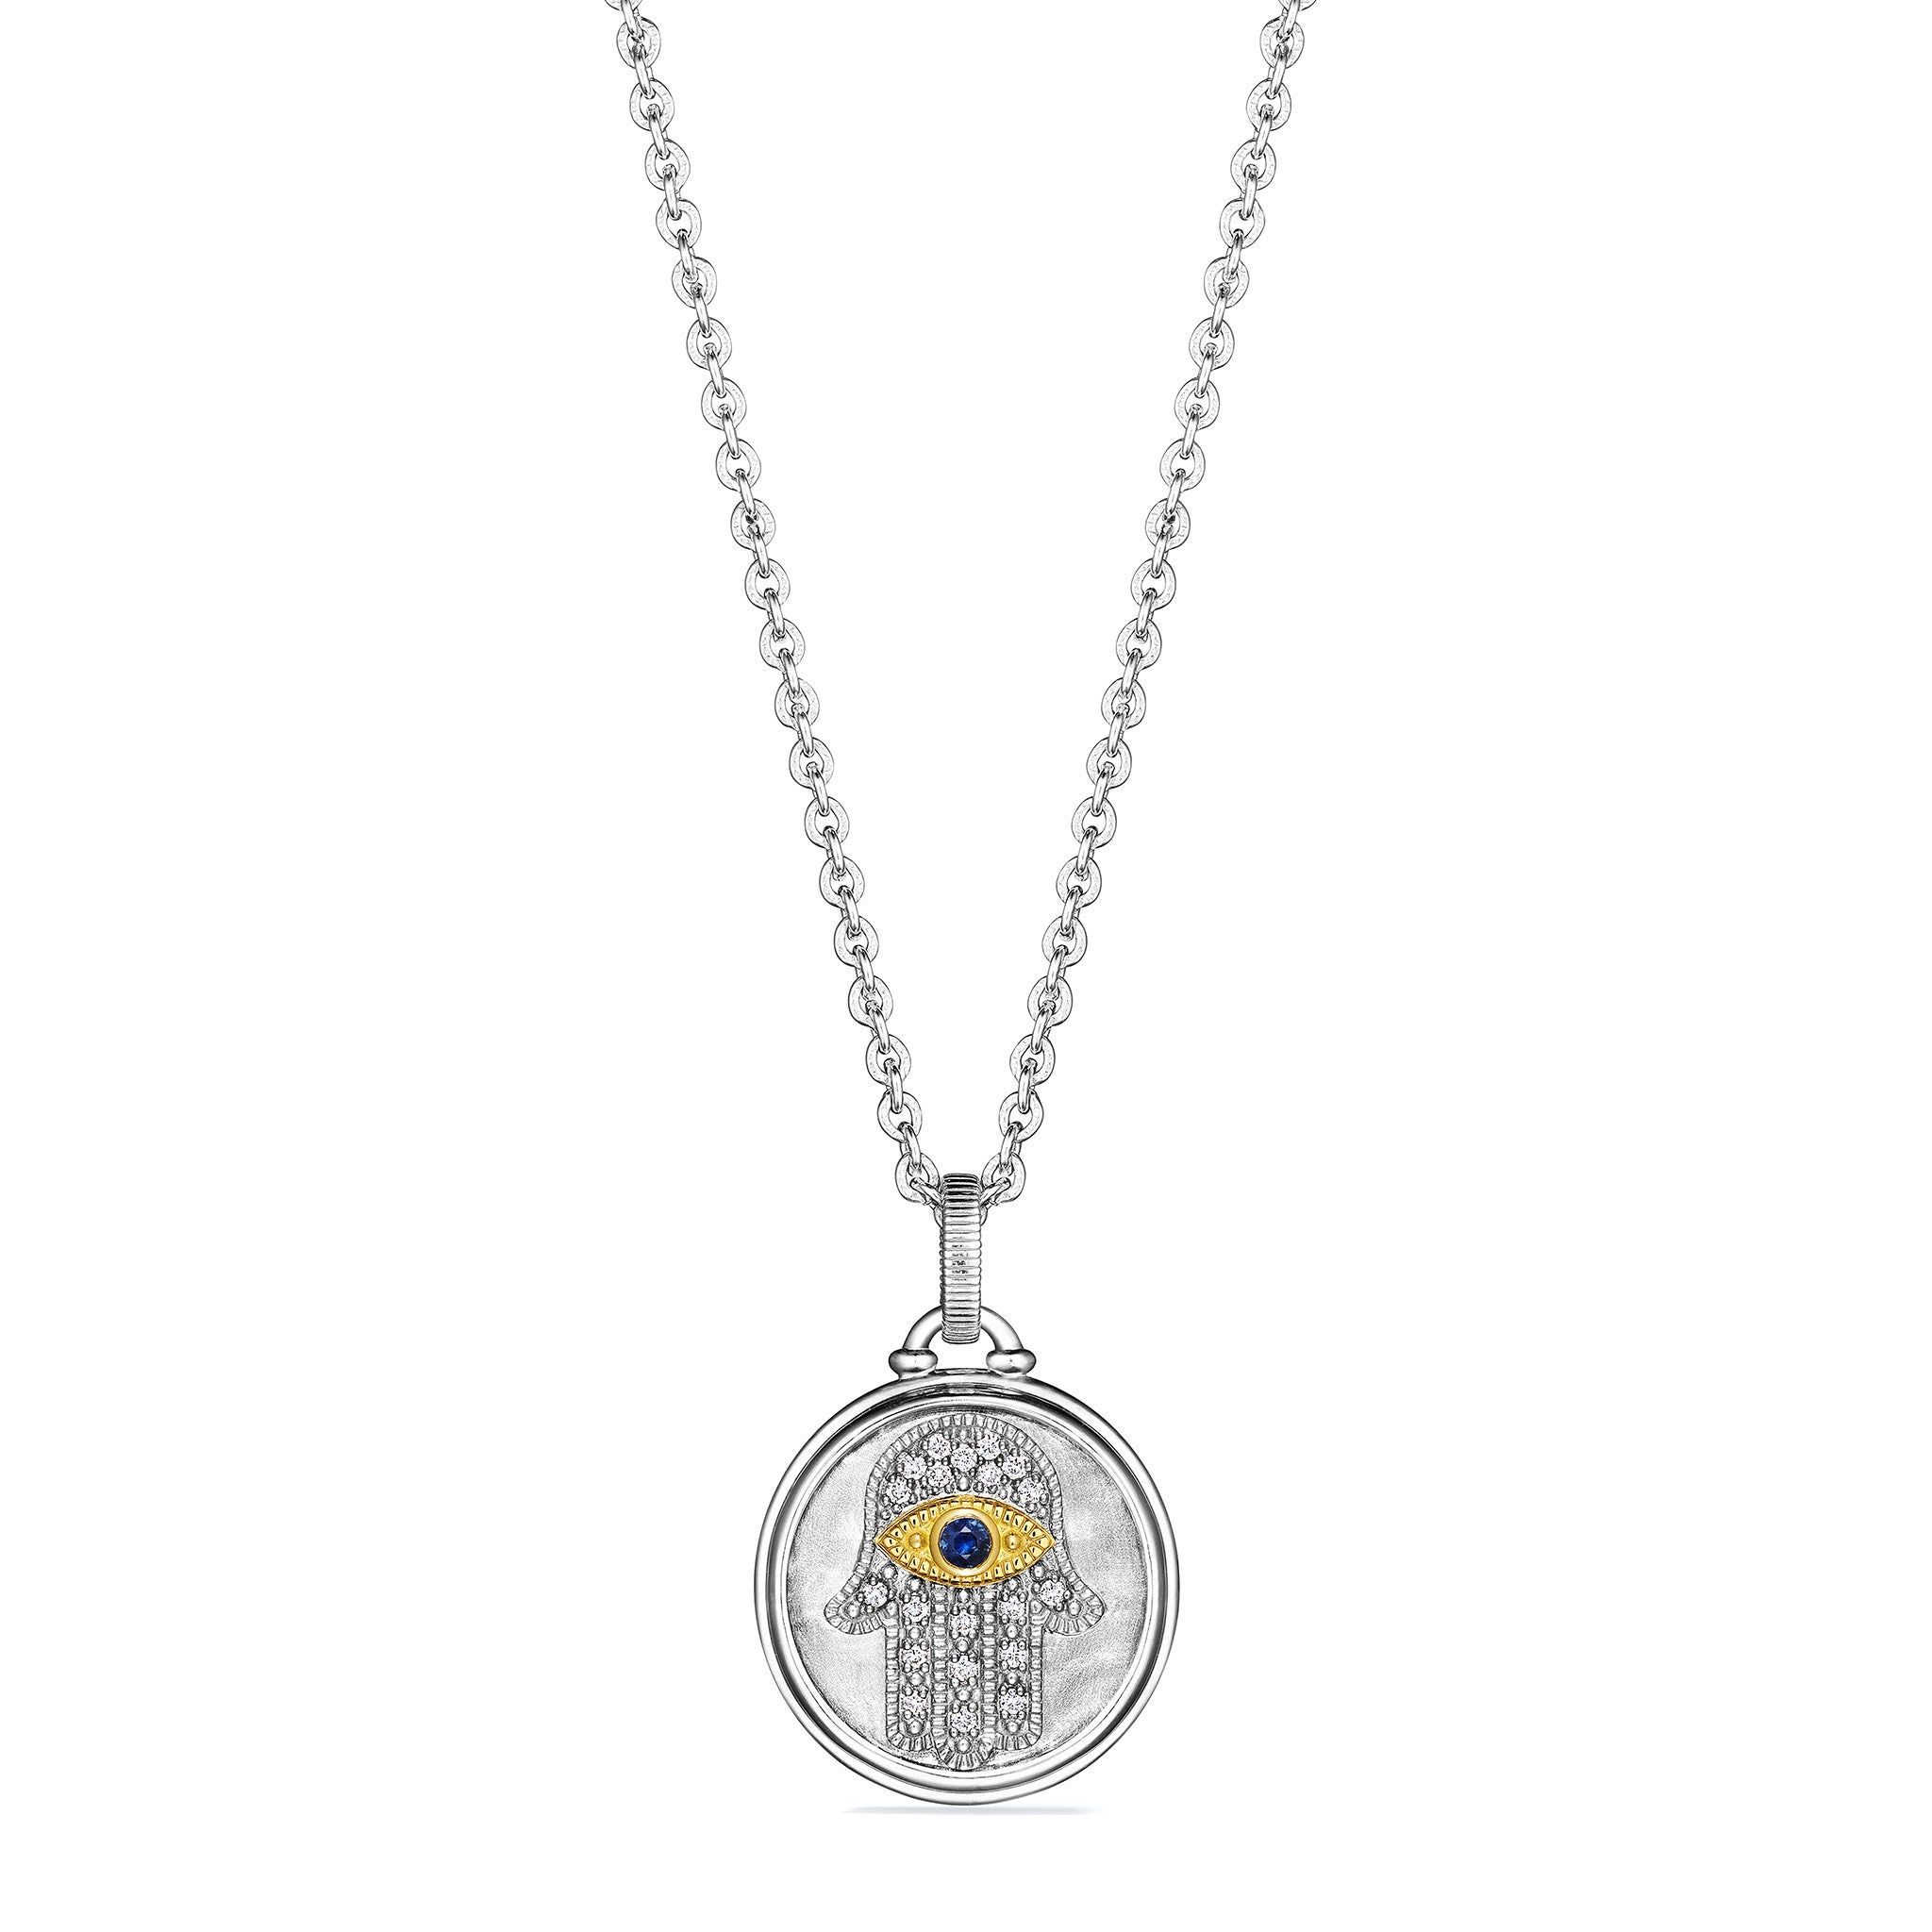 Little Luxuries Textured Hamsa Medallion Necklace With Blue Sapphire, Diamonds And 18K Gold